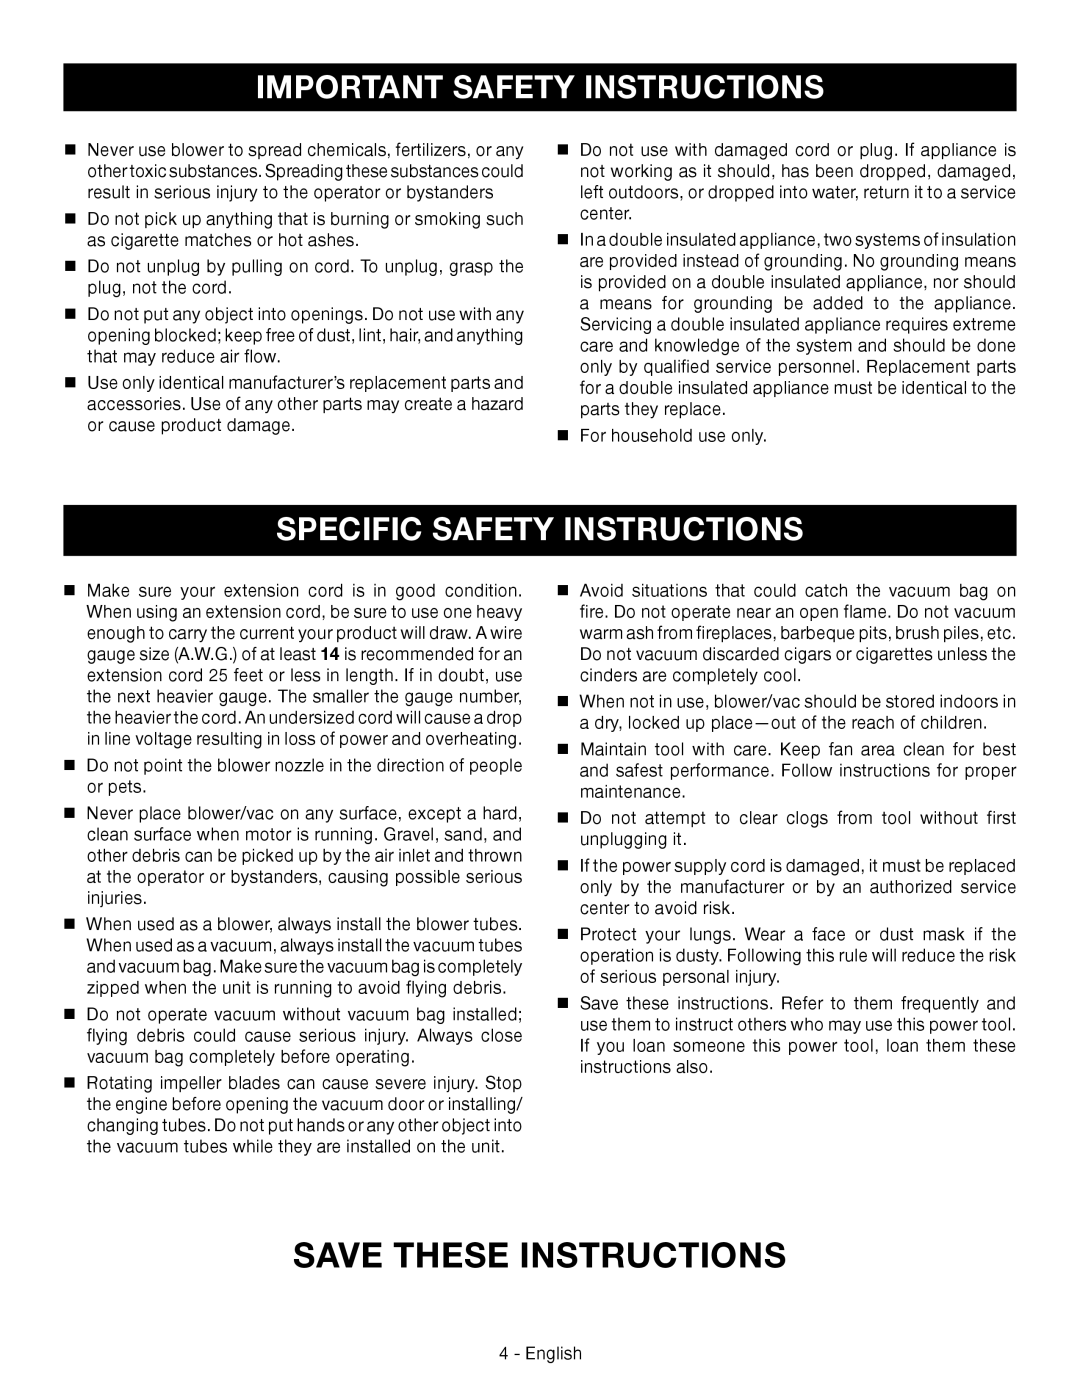 Ryobi RY42110 manuel dutilisation Save These Instructions, Specific Safety Instructions, Important Safety Instructions 